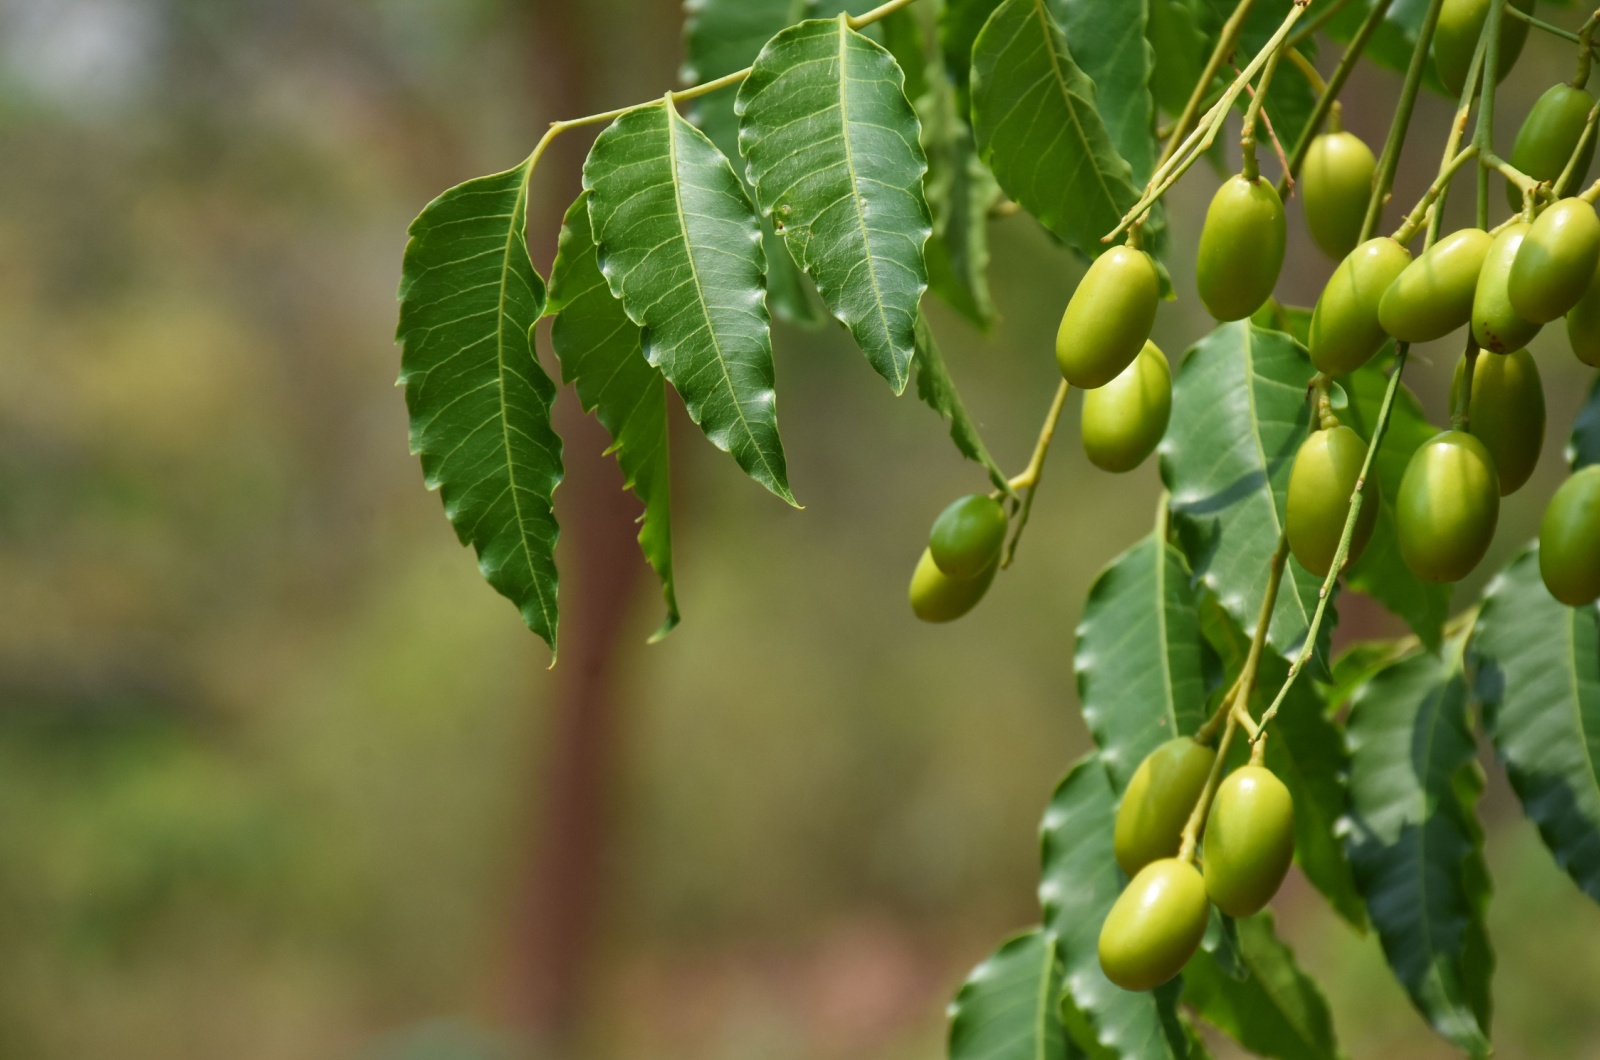 leaves of neem tree and fruits